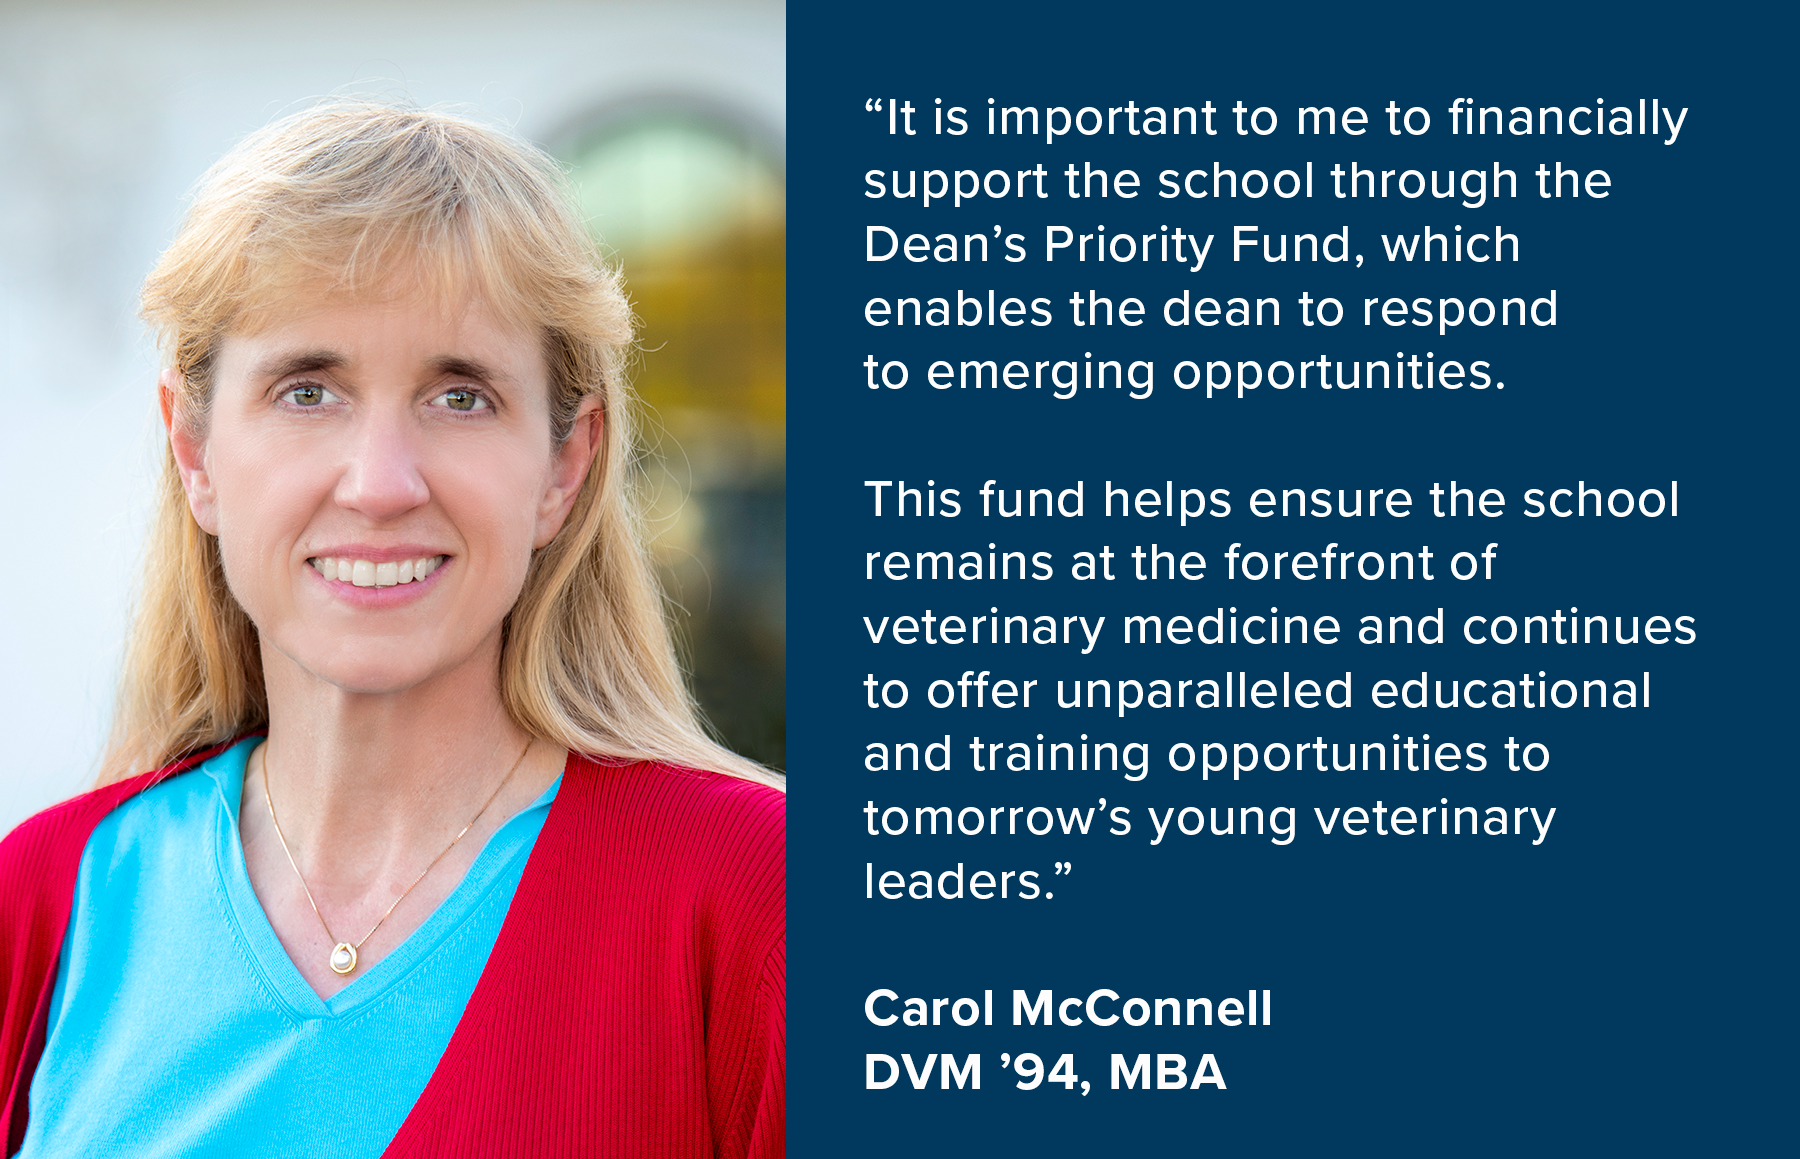 “It is important to me to financially support the school through the Dean’s Priority Fund, which enables the dean to respond to emerging opportunities. This fund helps ensure the school remains at the forefront of veterinary medicine and continues to offer unparalleled educational and training opportunities to tomorrow’s young veterinary leaders.” - Carol McConnell, DVM ’94, MBA